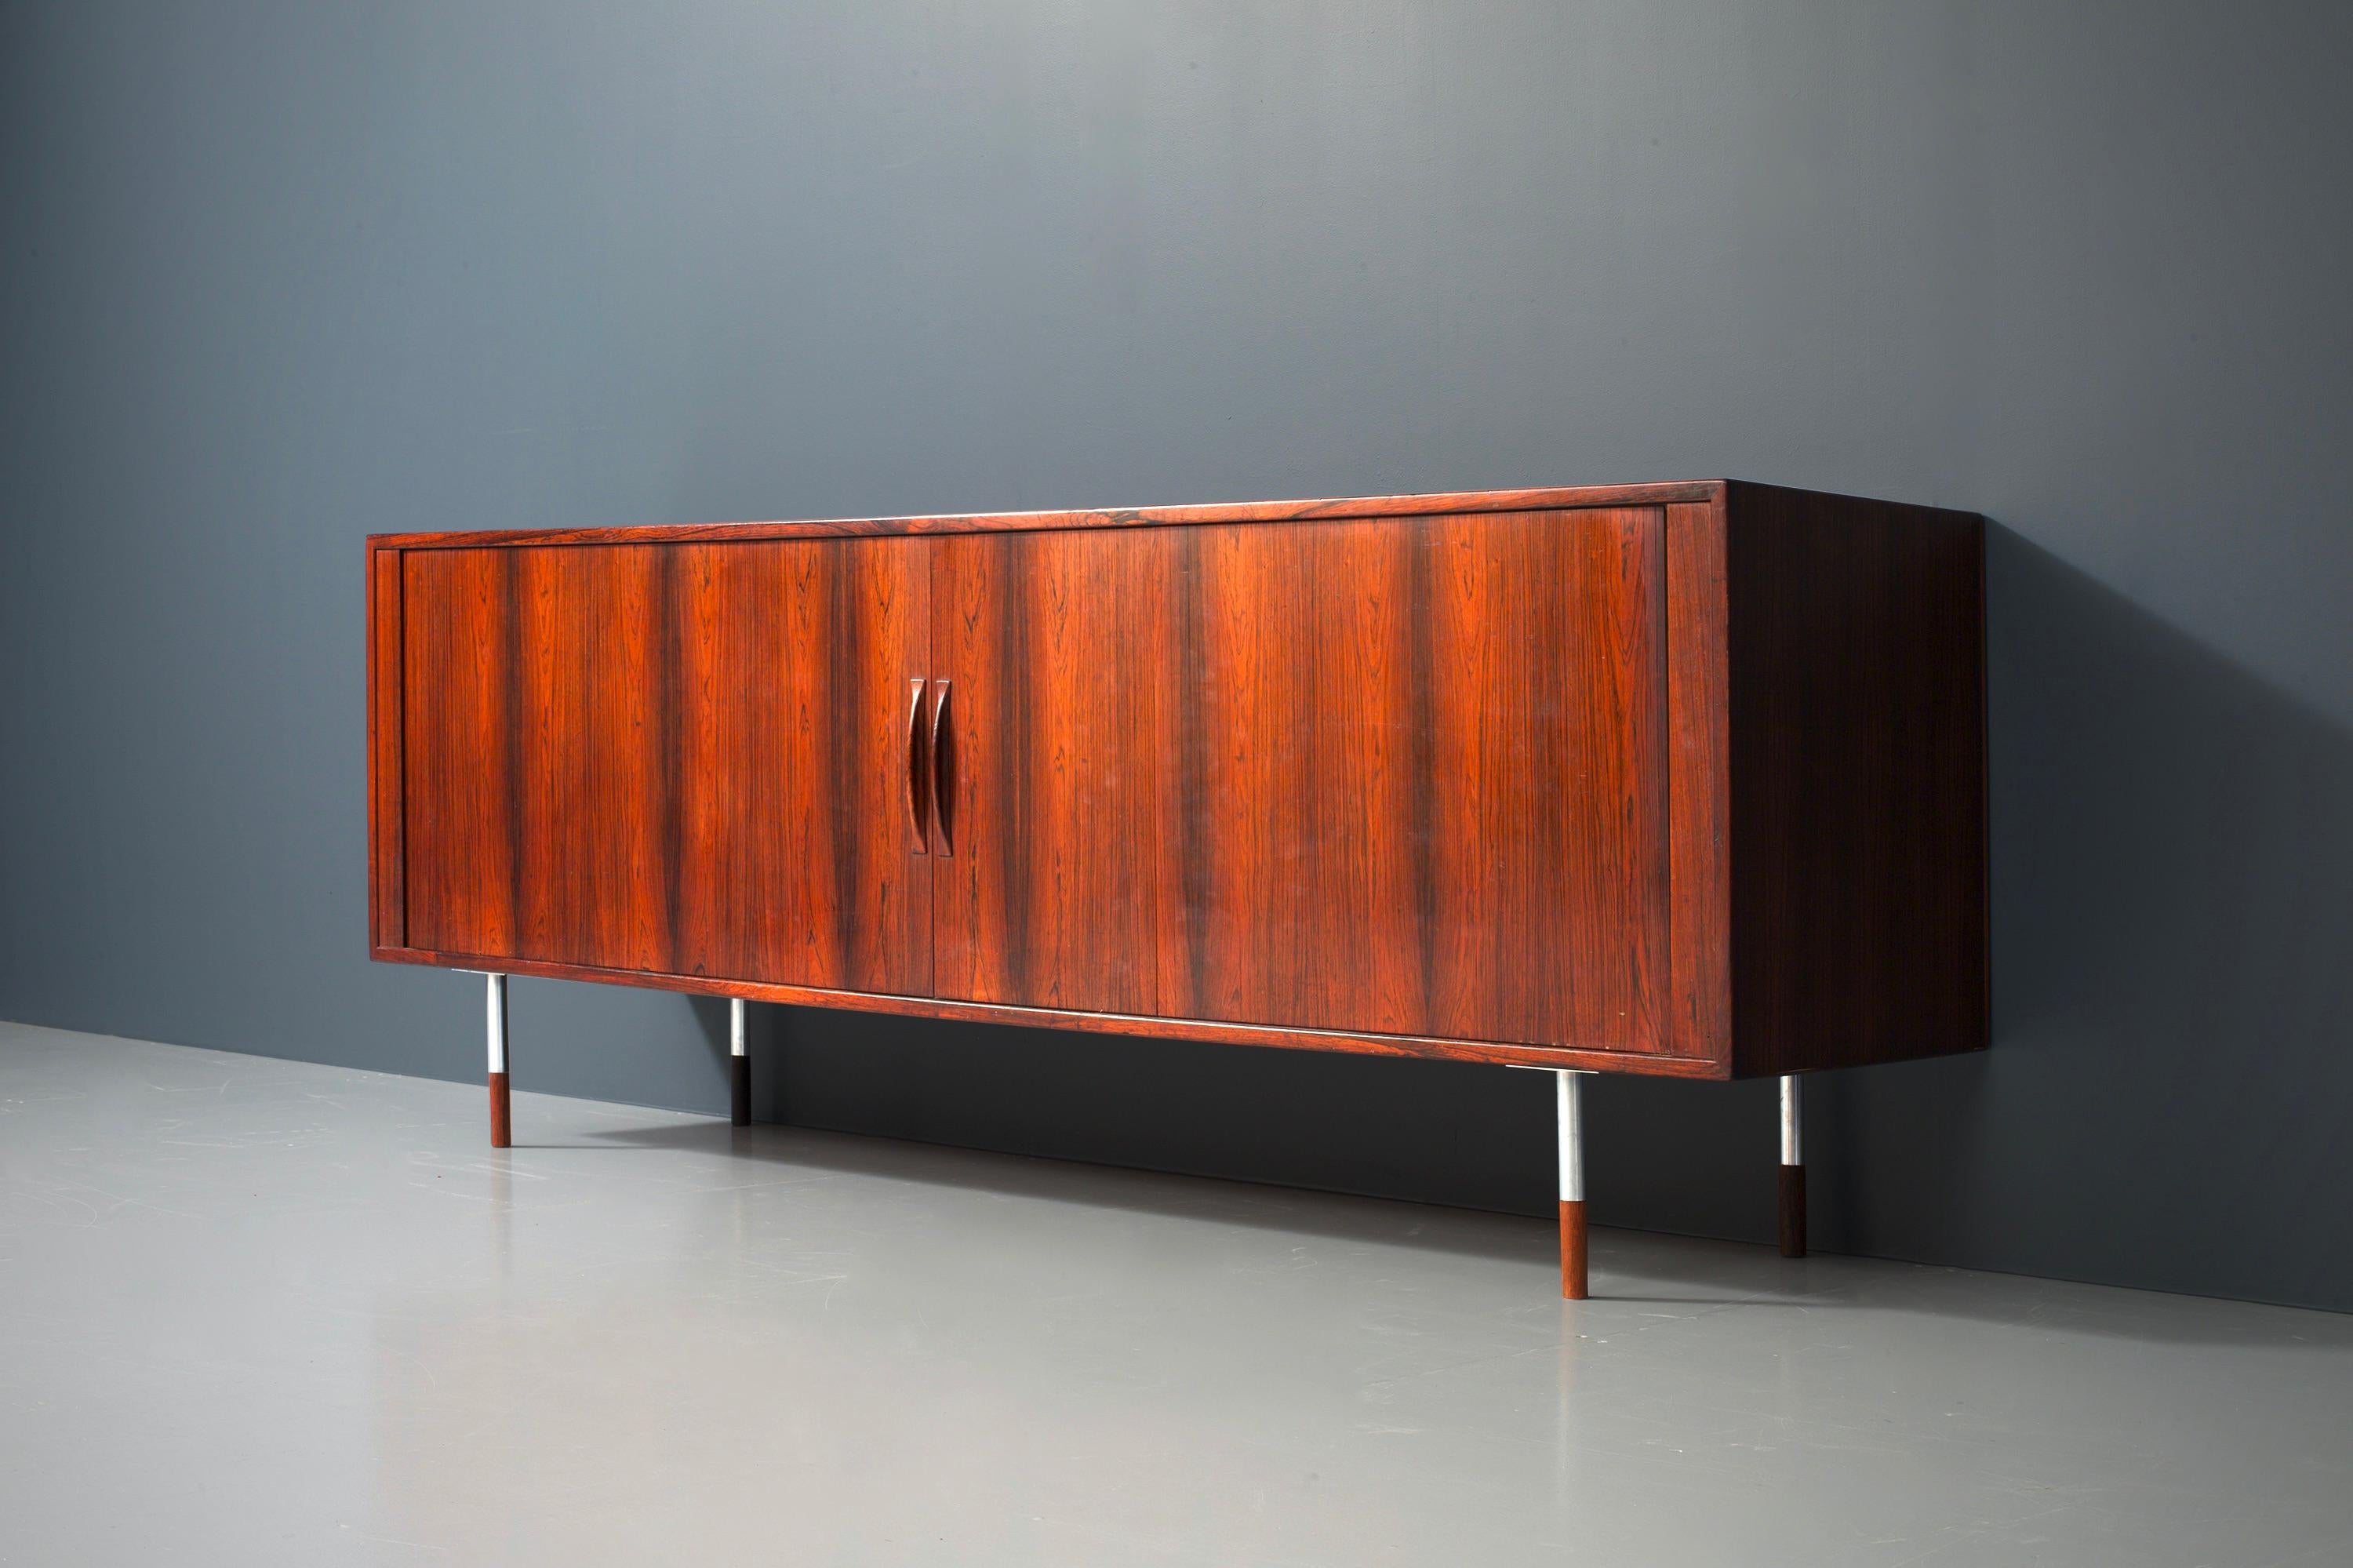 Sideboard with tambours doors by Arne Vodder for Sibast Møbler, recognizable by its simplicity. The design is modern and minimal yet very distinct. The latter is partly due to the round feet consisting of half wood and half metal. The rosewood has